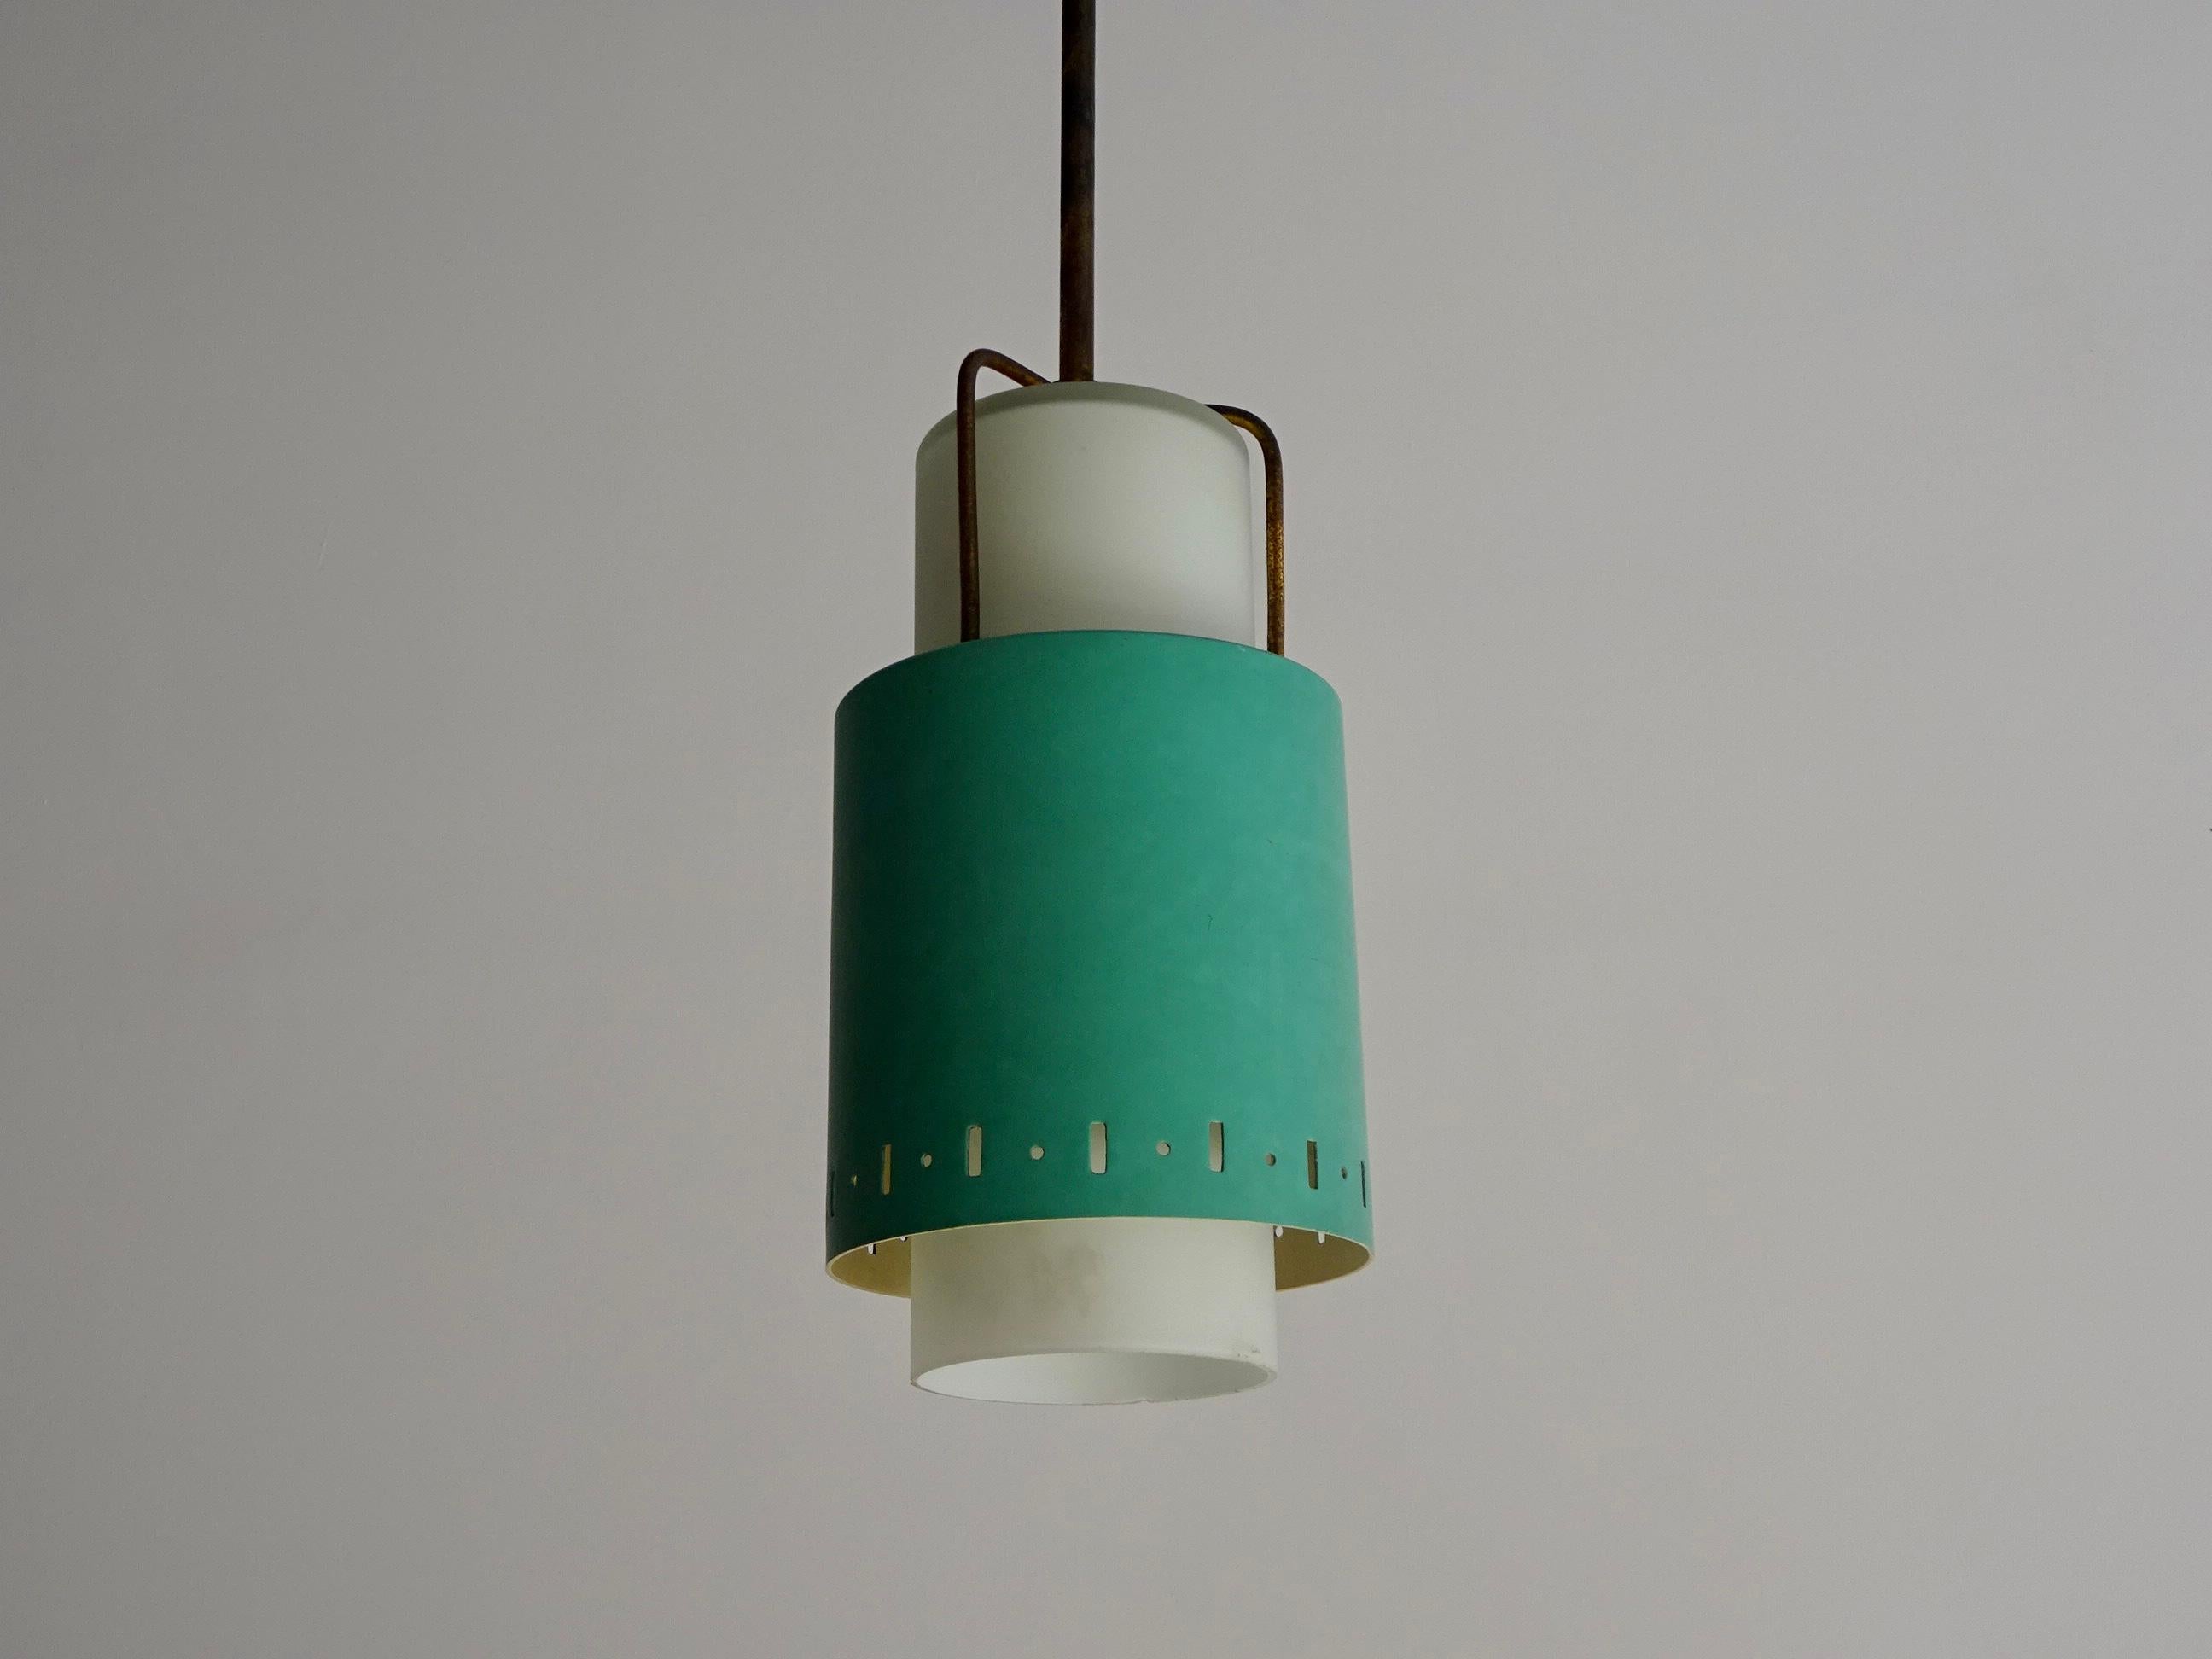 Ceiling lamp in aluminum, brass and opal glass.